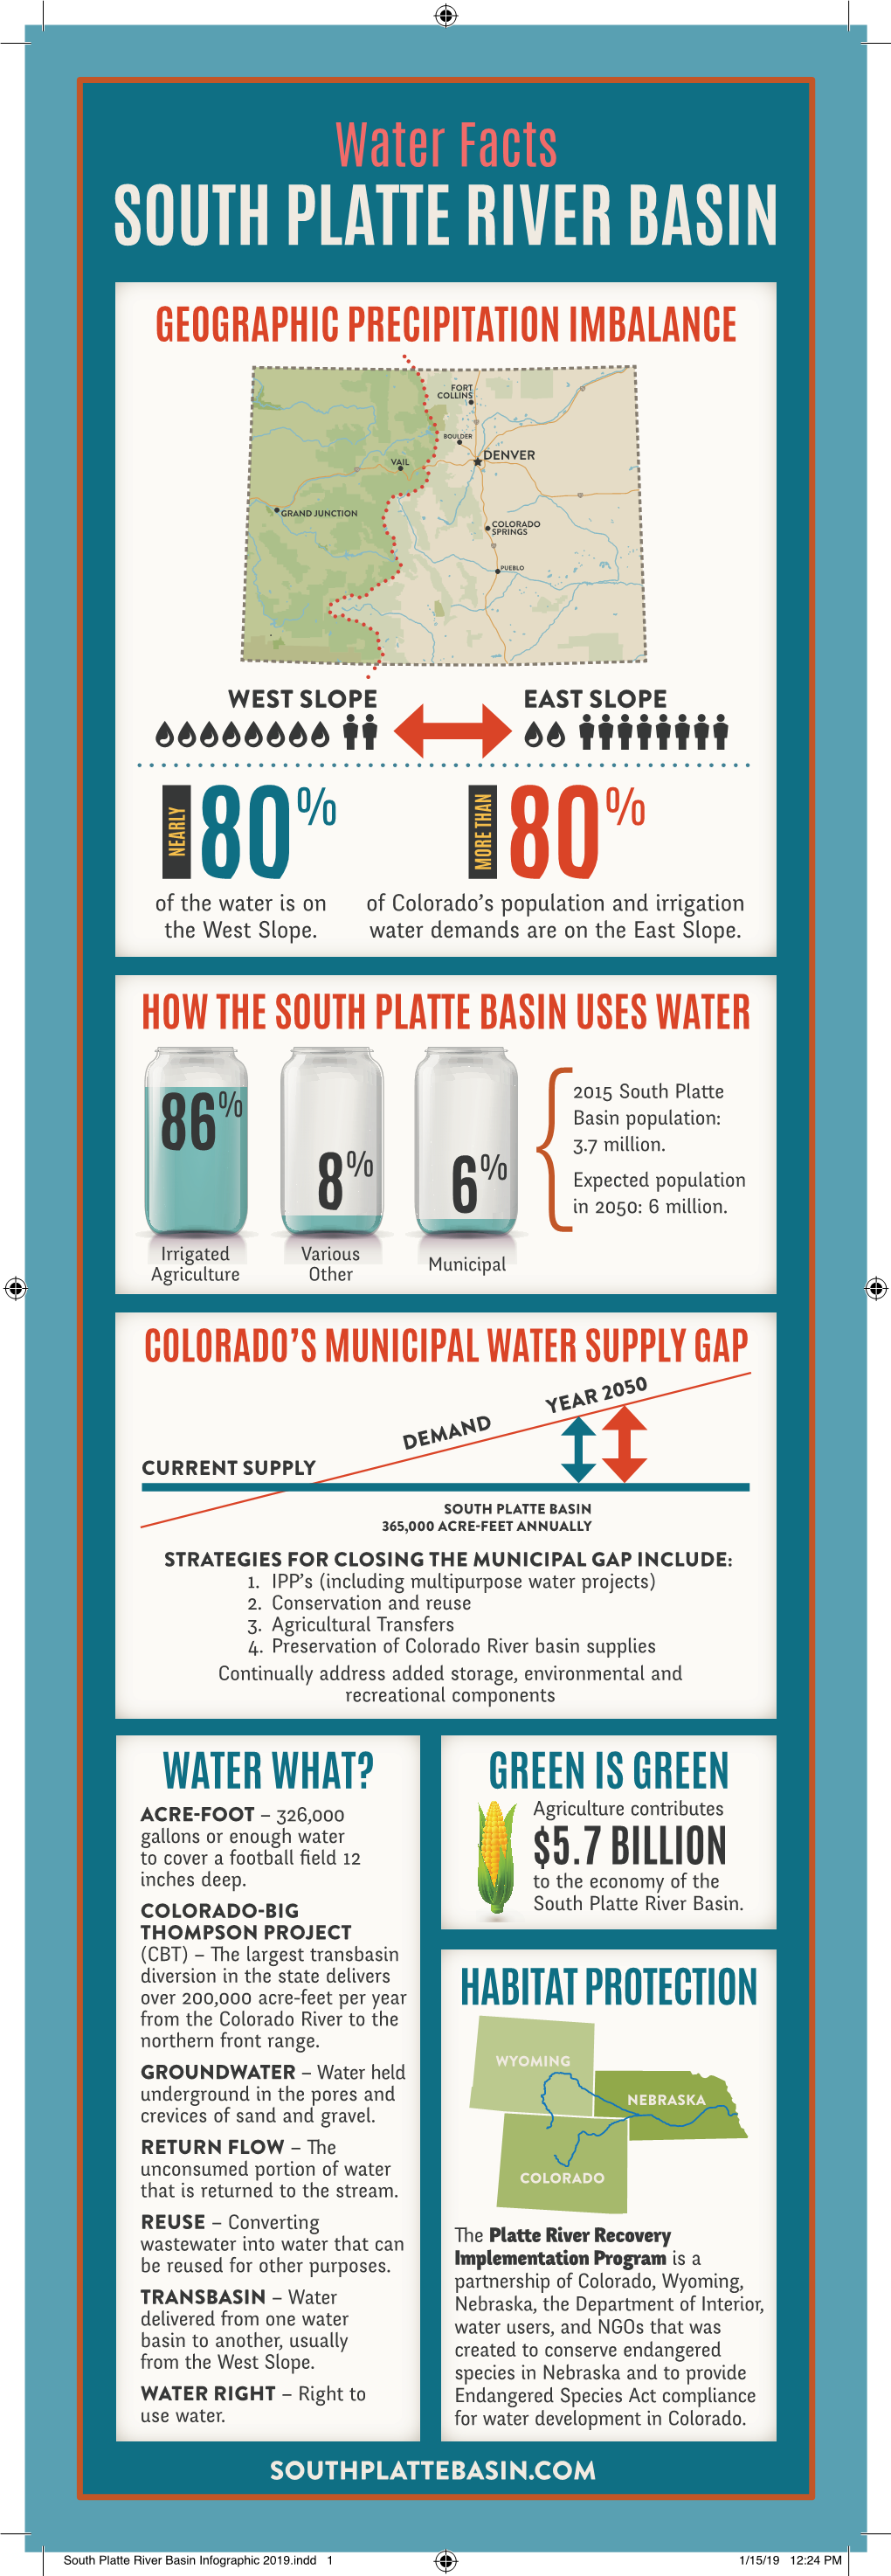 South Platte Basin Water Facts